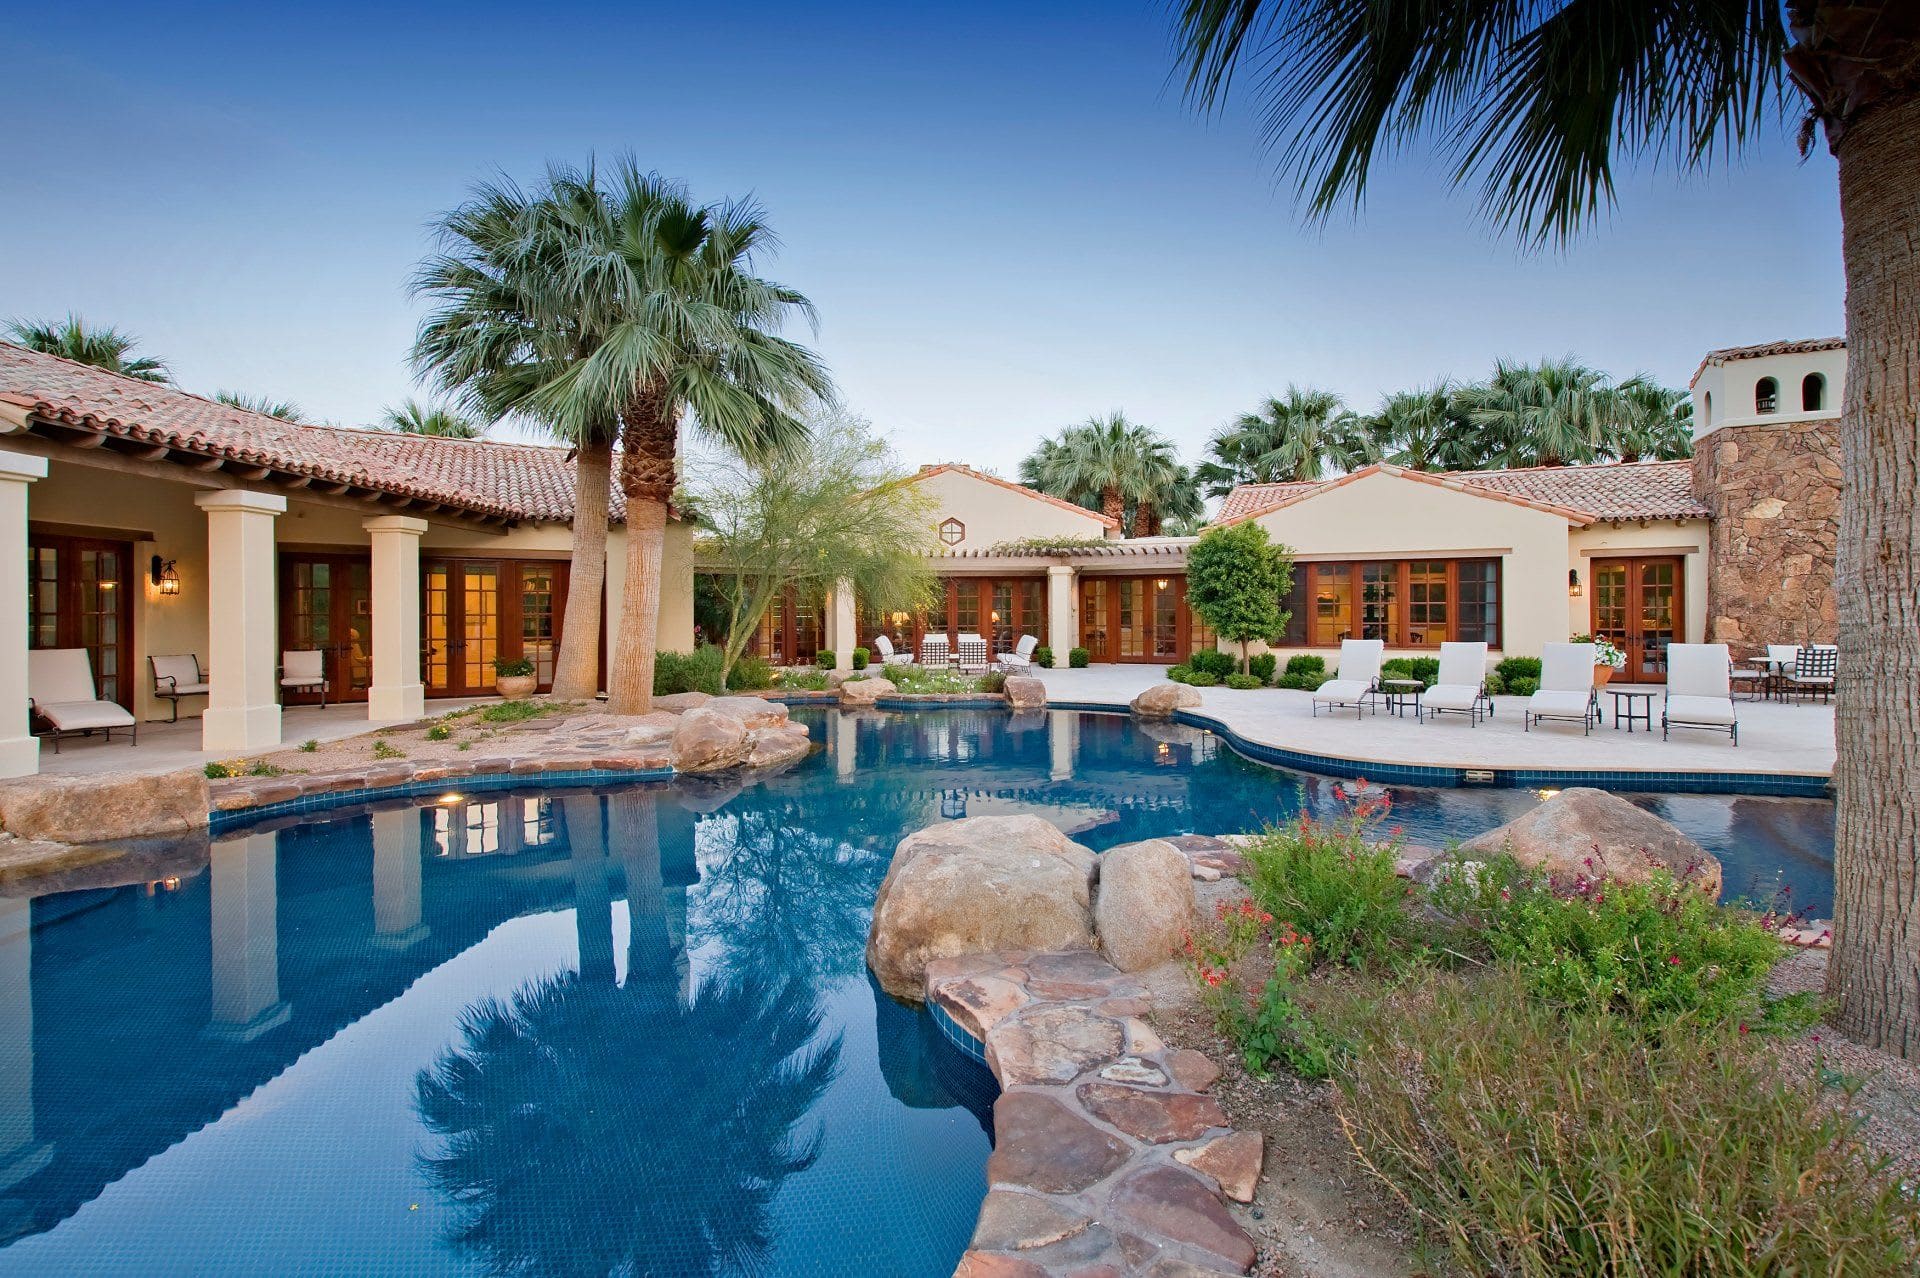 Palm trees and a swimming pool in a backyard.